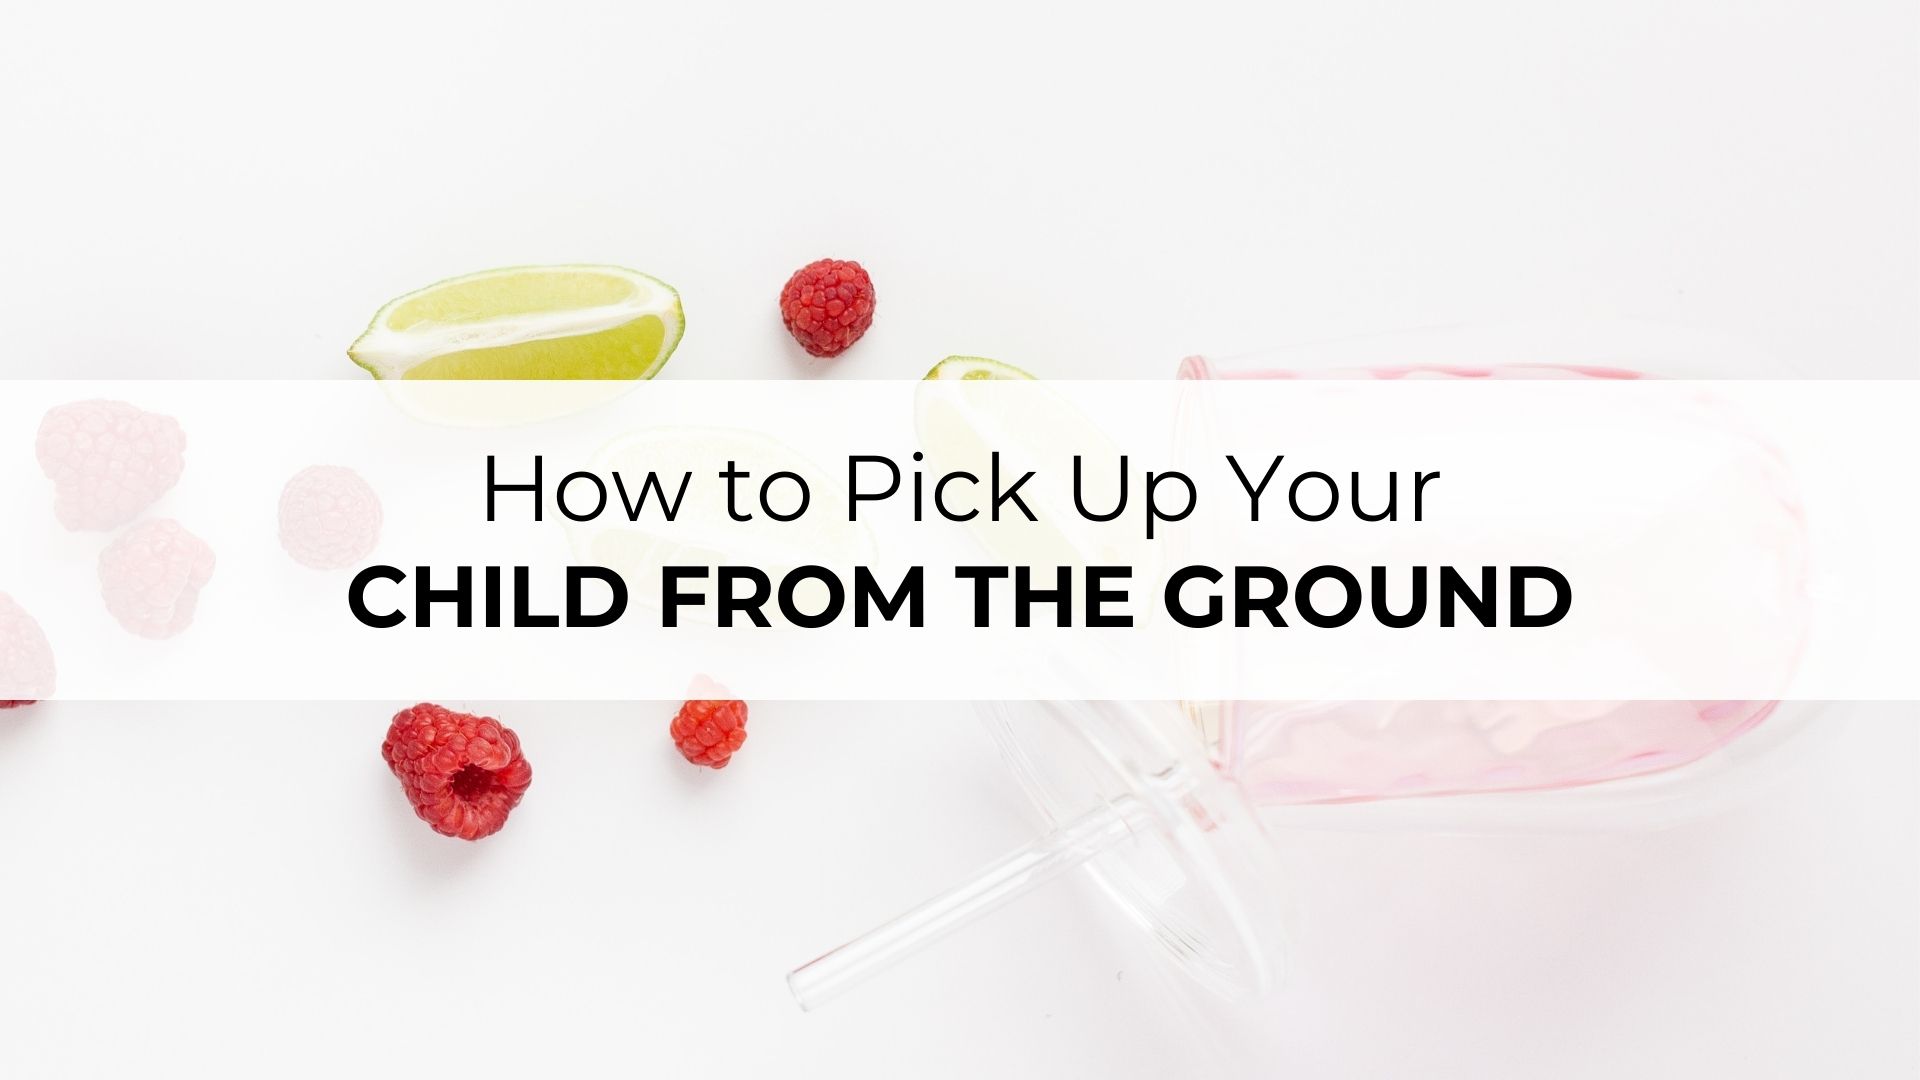 Our Best Tips to Pick Up Your Child from the Ground